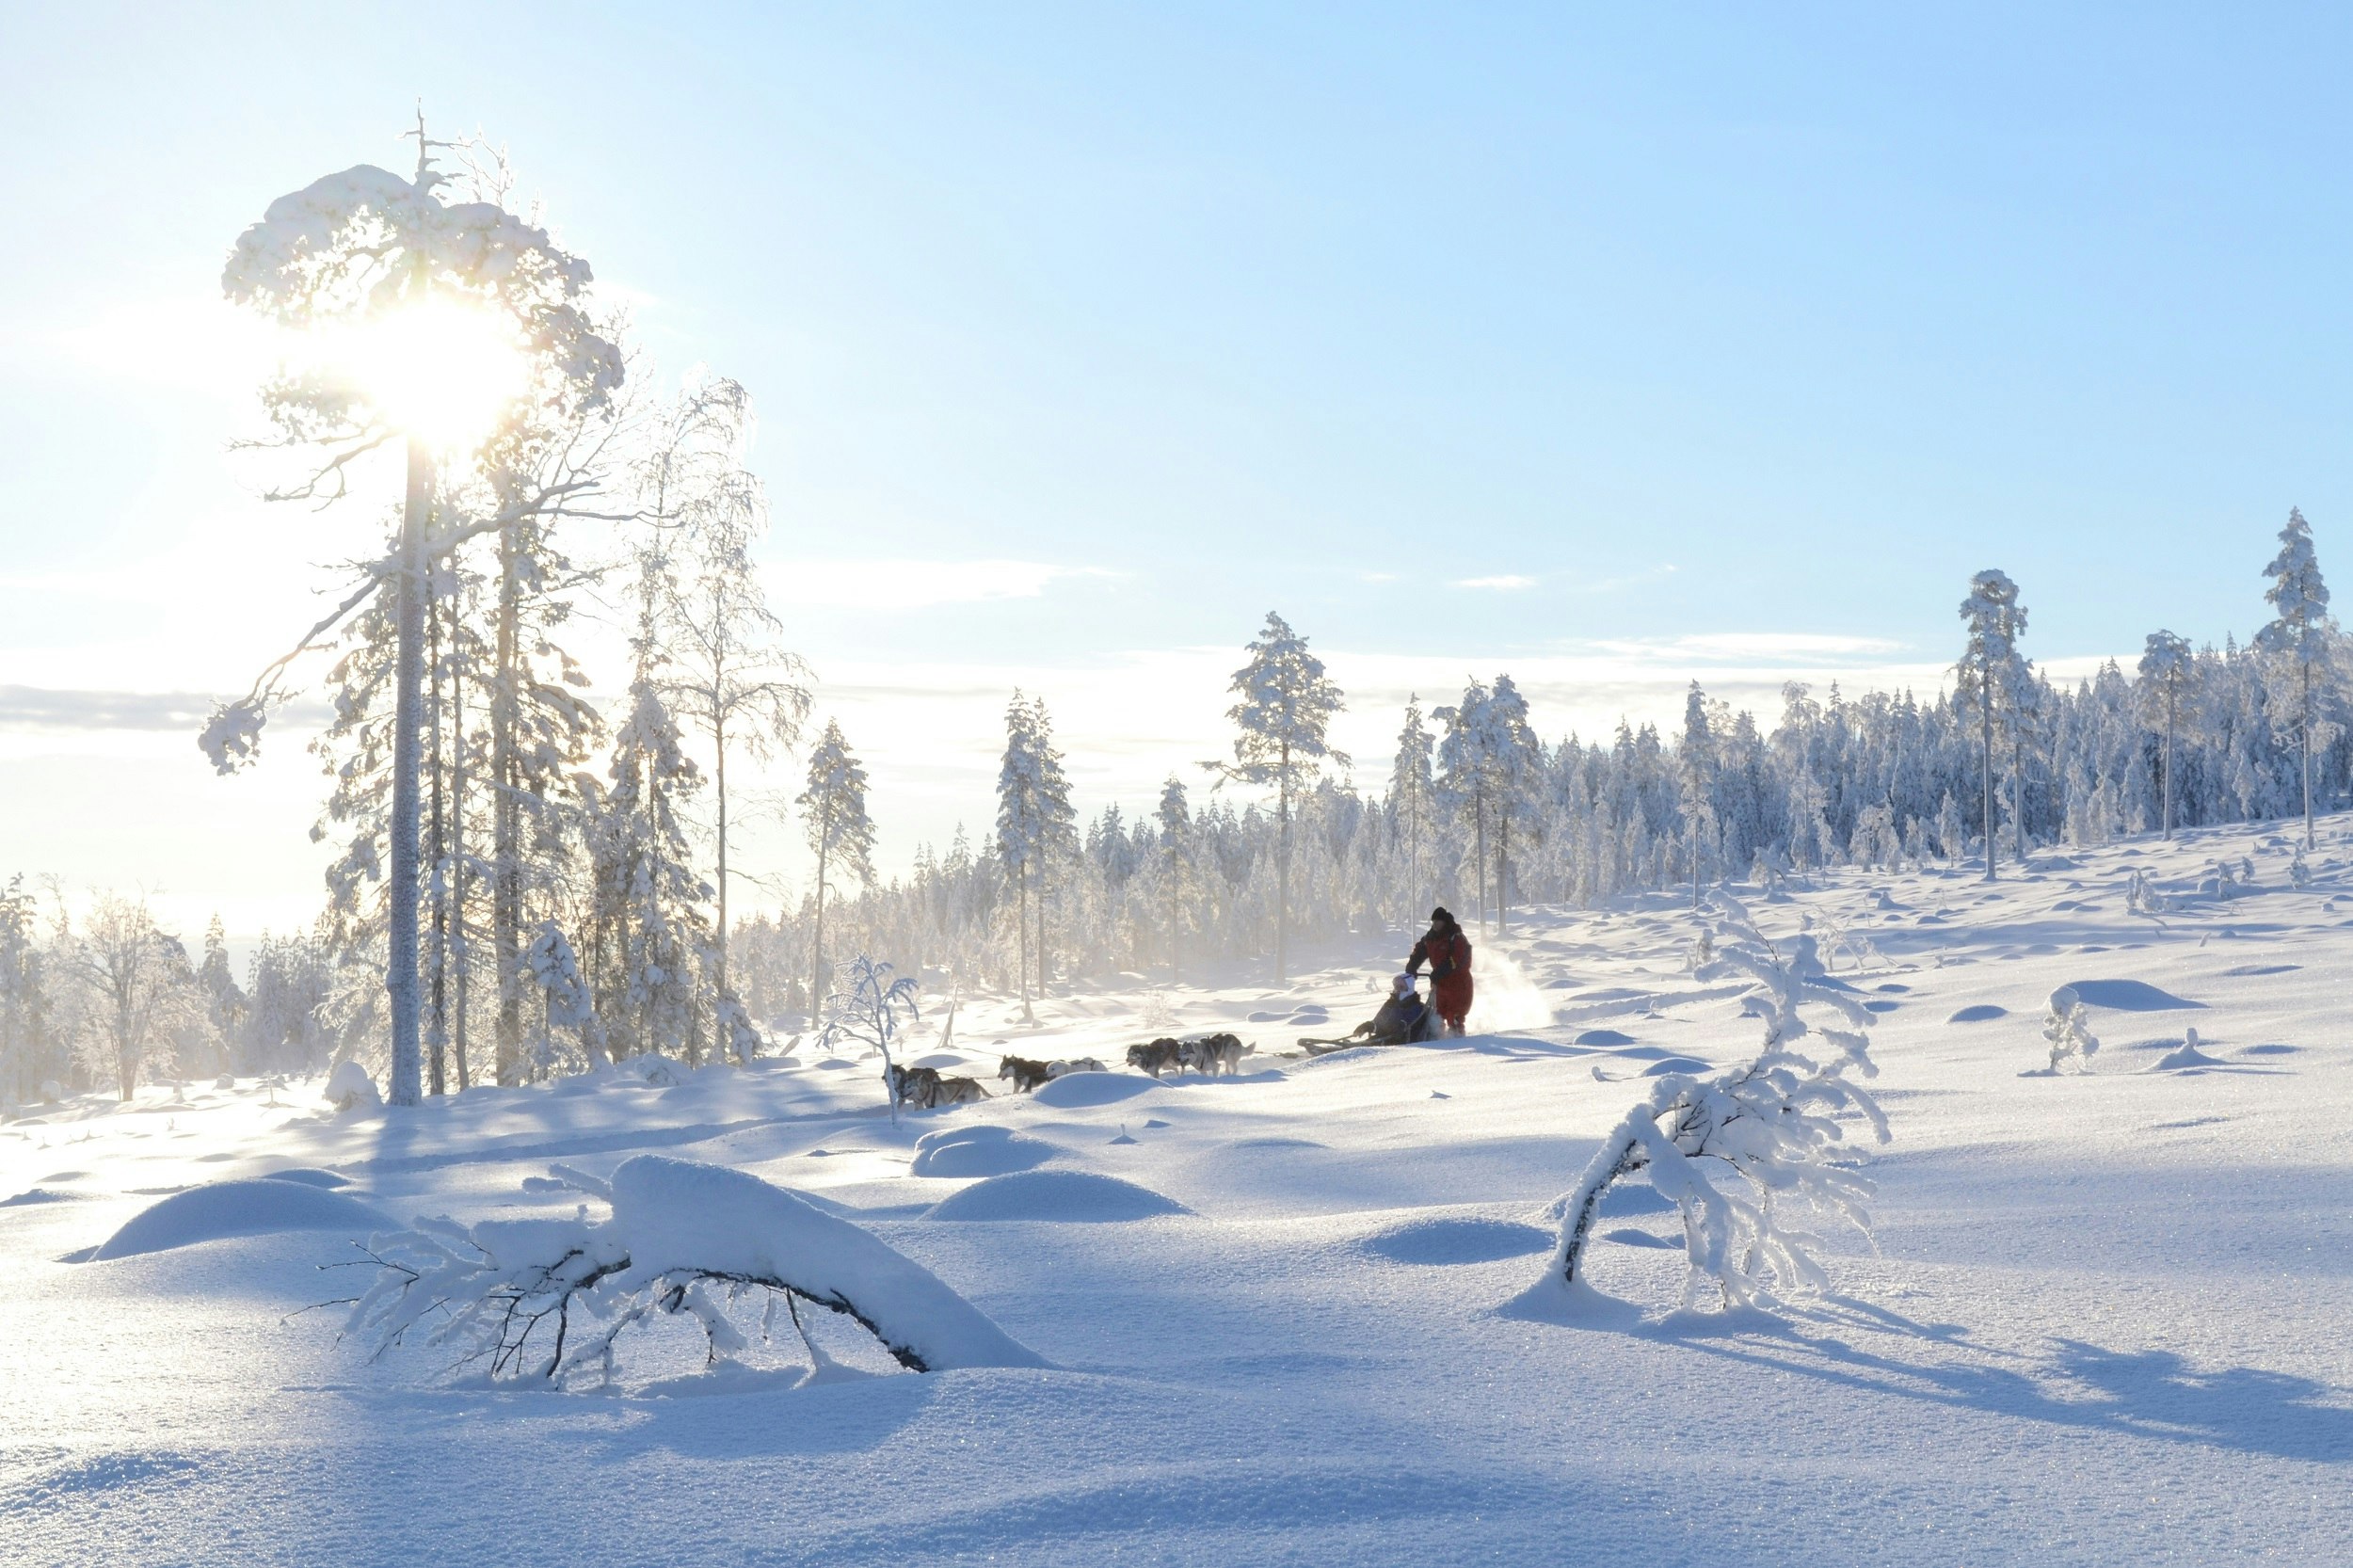 A dog sled zooms across an idyllic snowy landscape, with the sun sparkling behind a snow-covered tree.